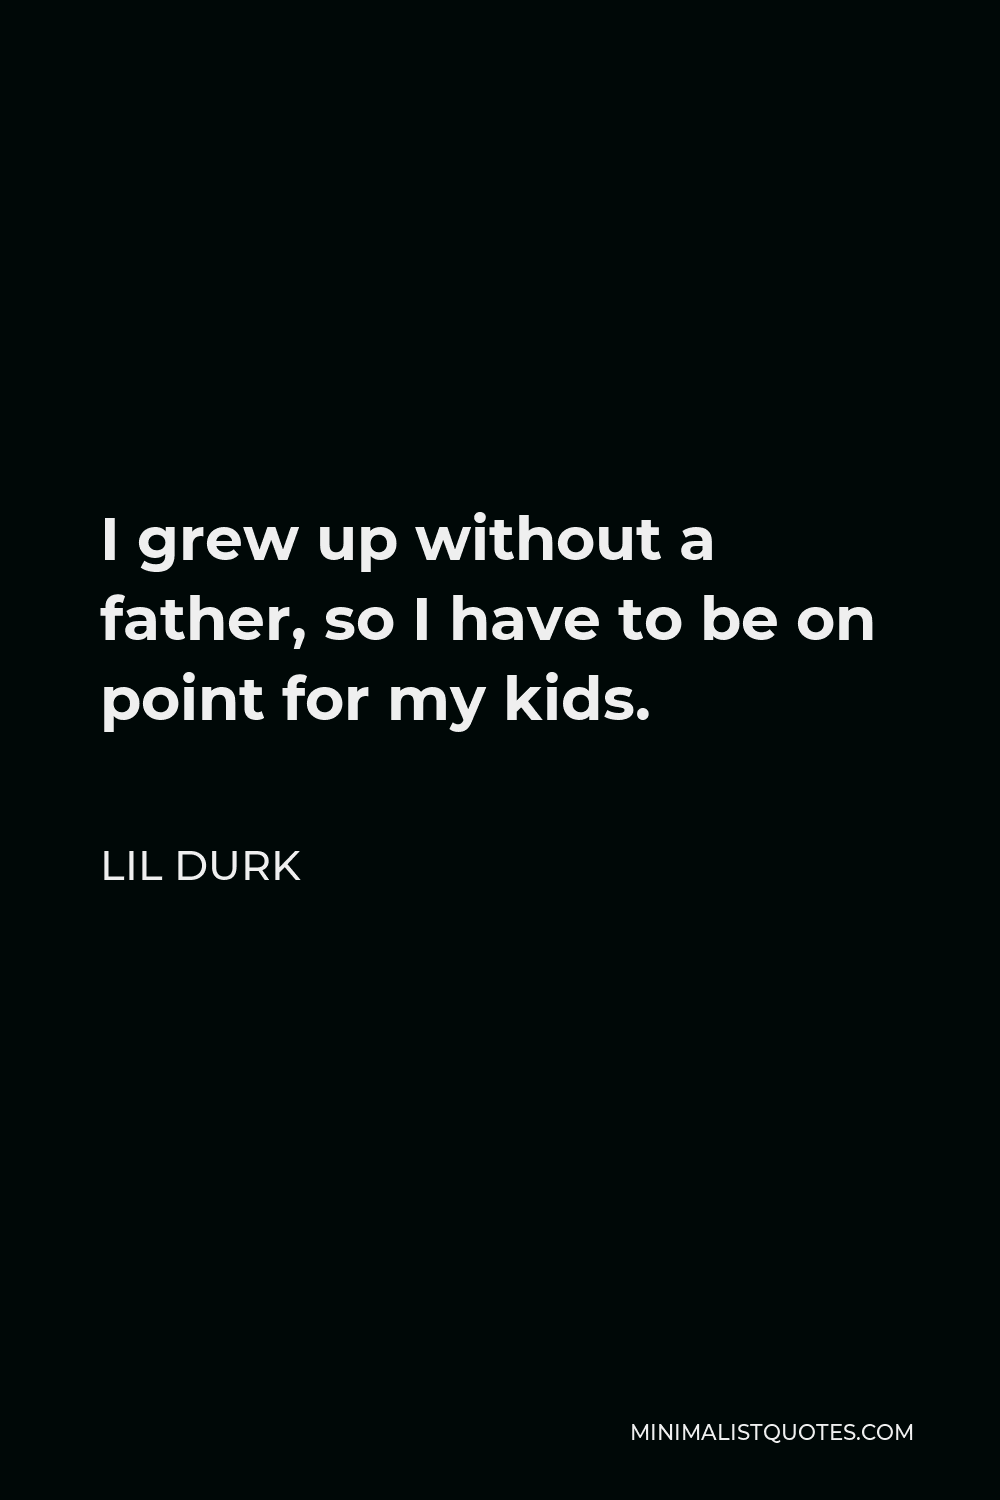 Lil Durk Quote - I grew up without a father, so I have to be on point for my kids.